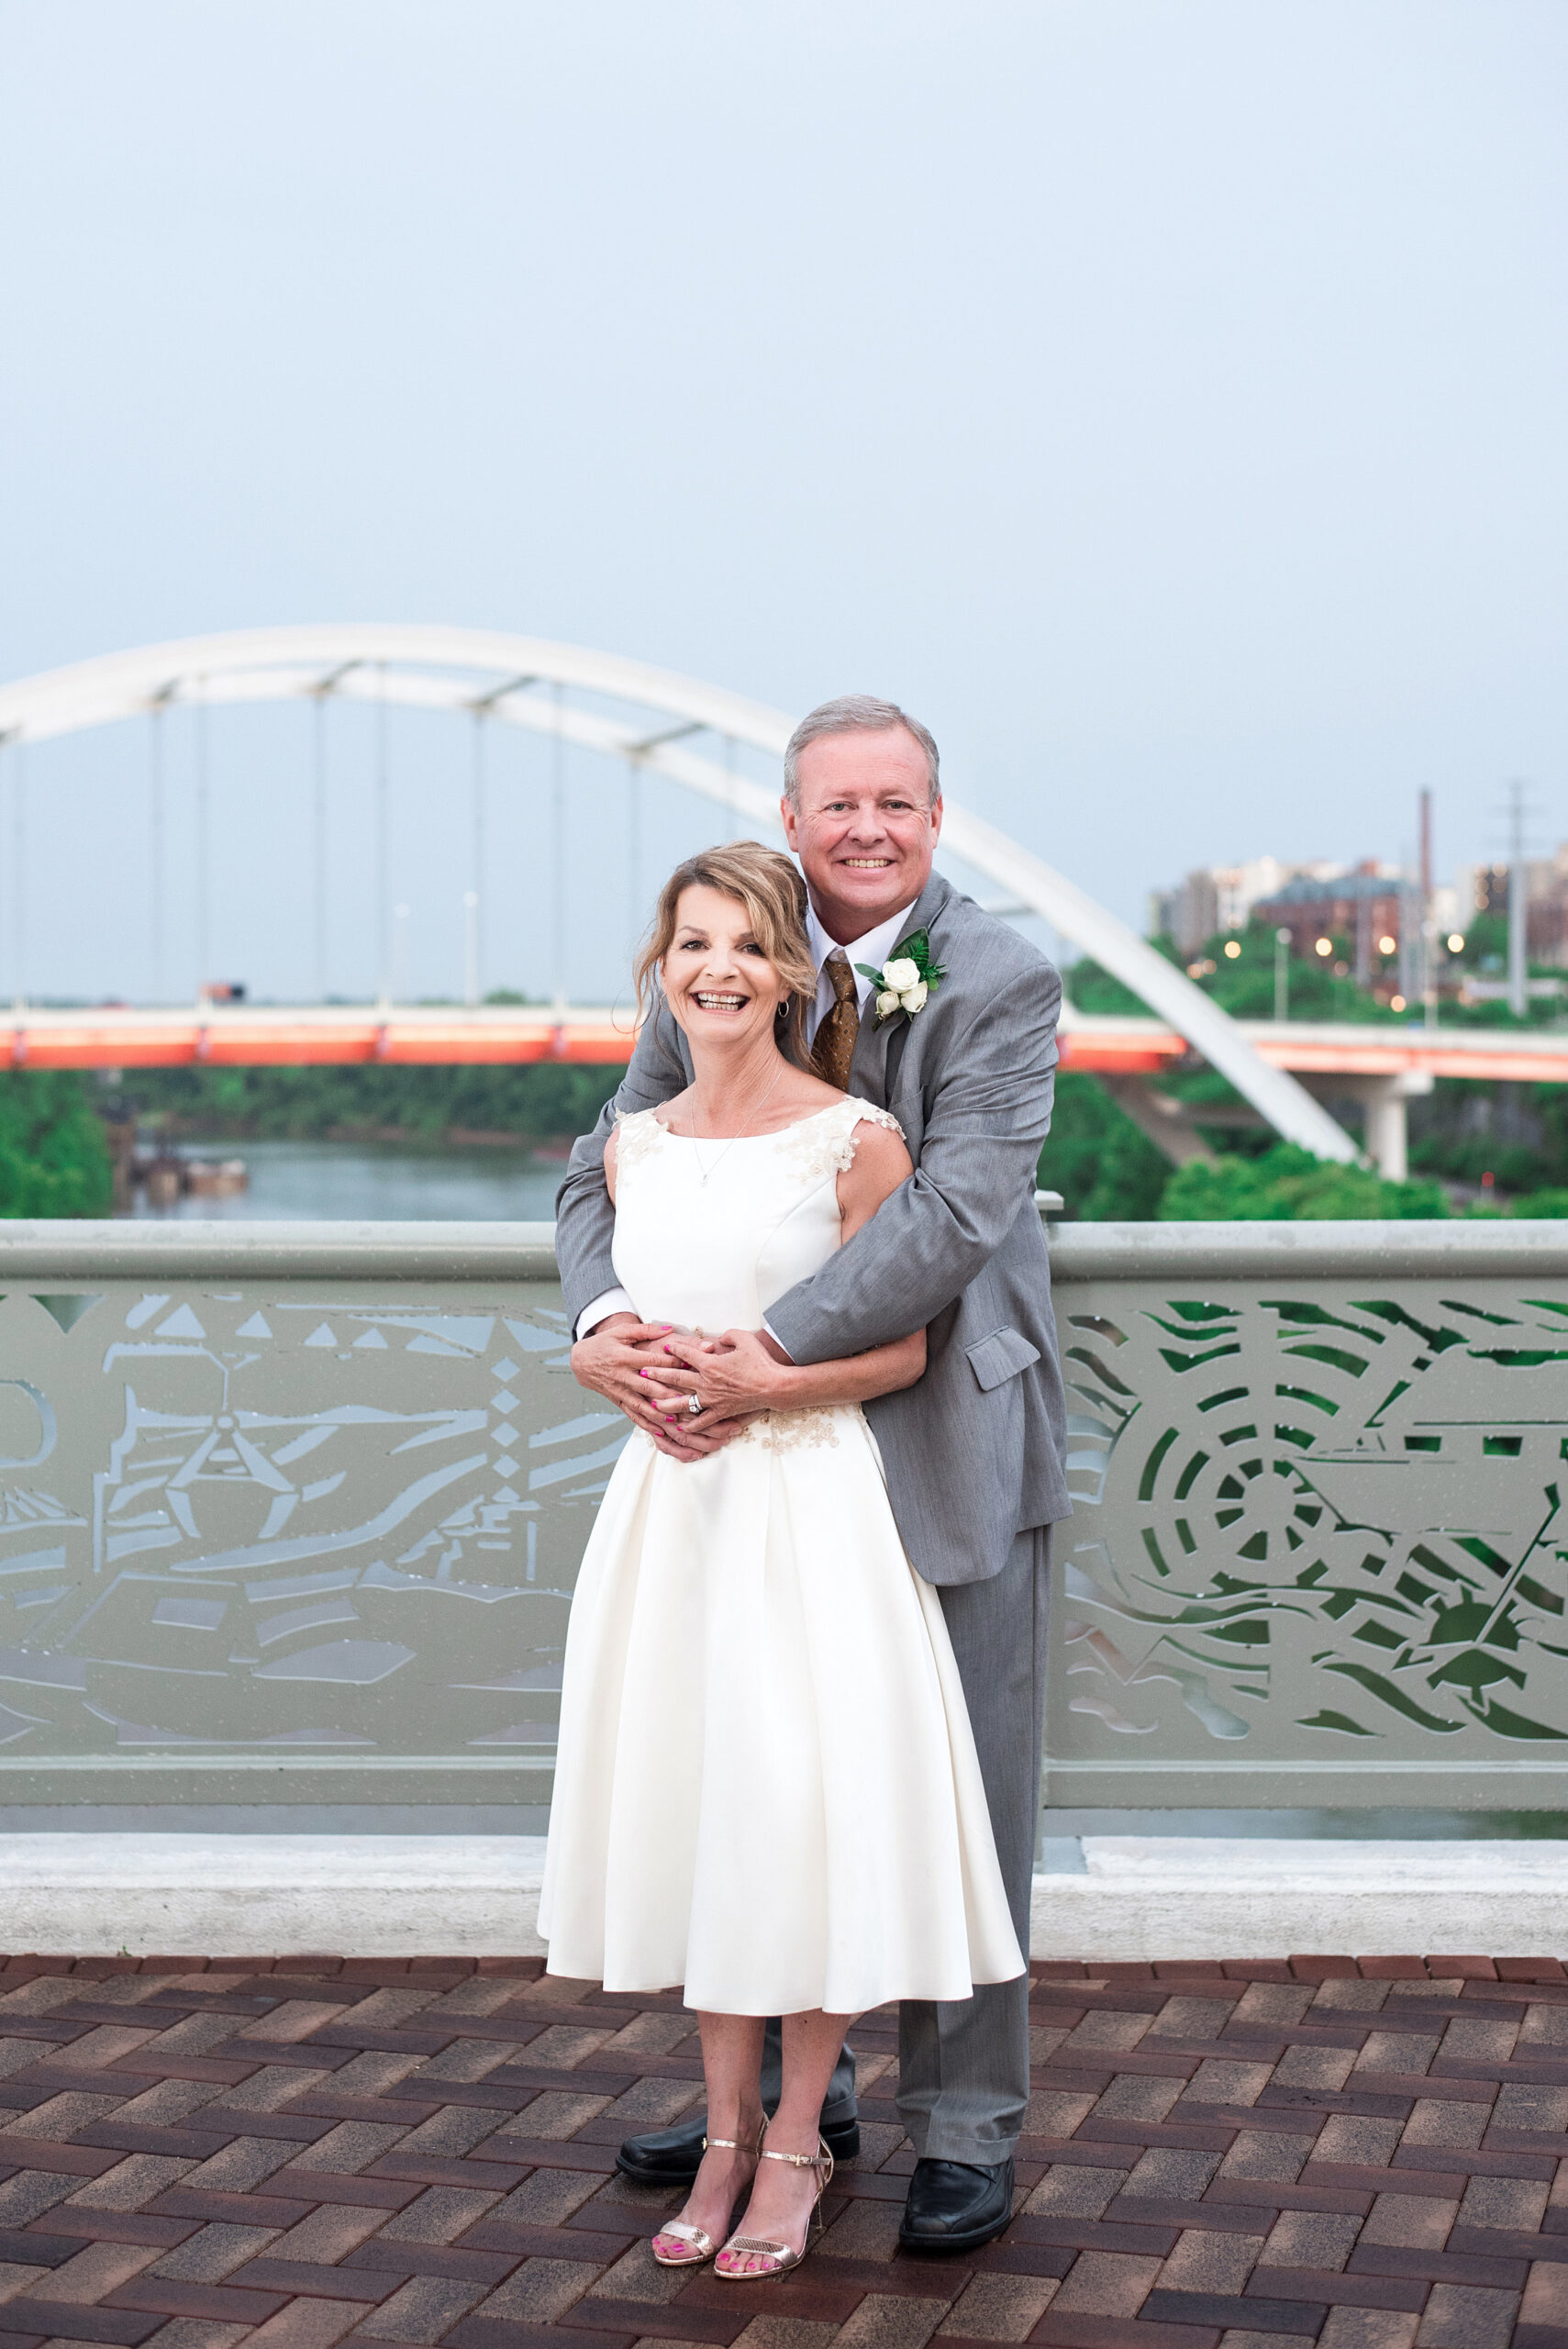 Standing on the Pedestrian Bridge in Nashville with another bridge in the background, the groom embraces the bride from behind as they both smile for the camera. The bride is wearing a tea length white sleeveless wedding dress with lacy floral accents and gold stiletto heels. The groom  is wearing a gray suit with a white shirt and brown tie and a white boutonniere. The Cumberland River and Nashville skyline are in the background behind them. 